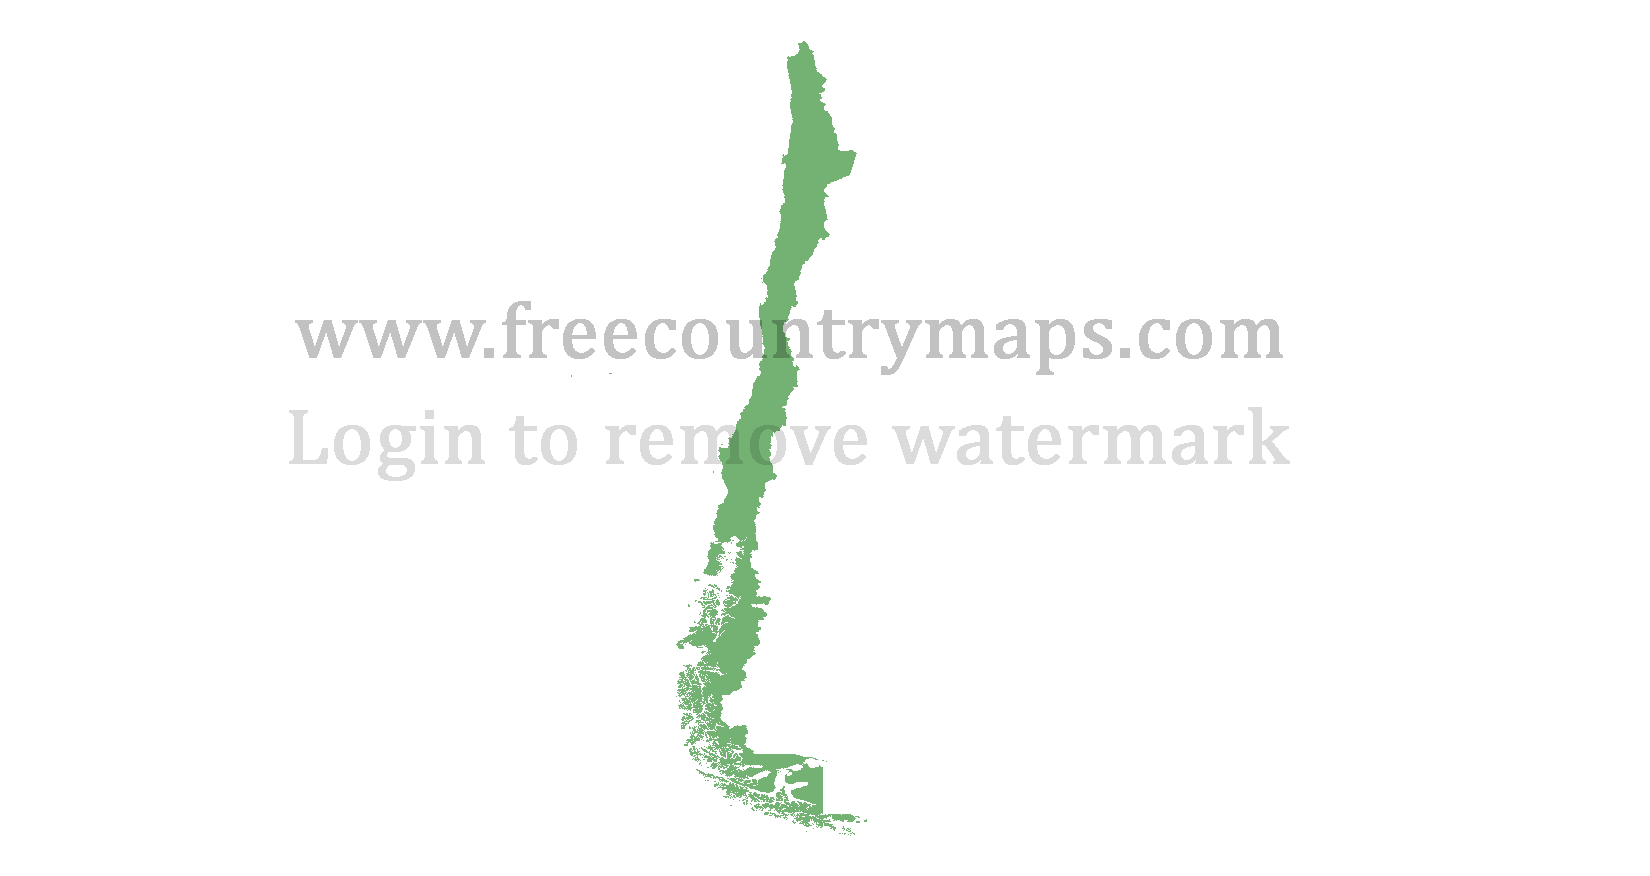 Blank Map of Chile